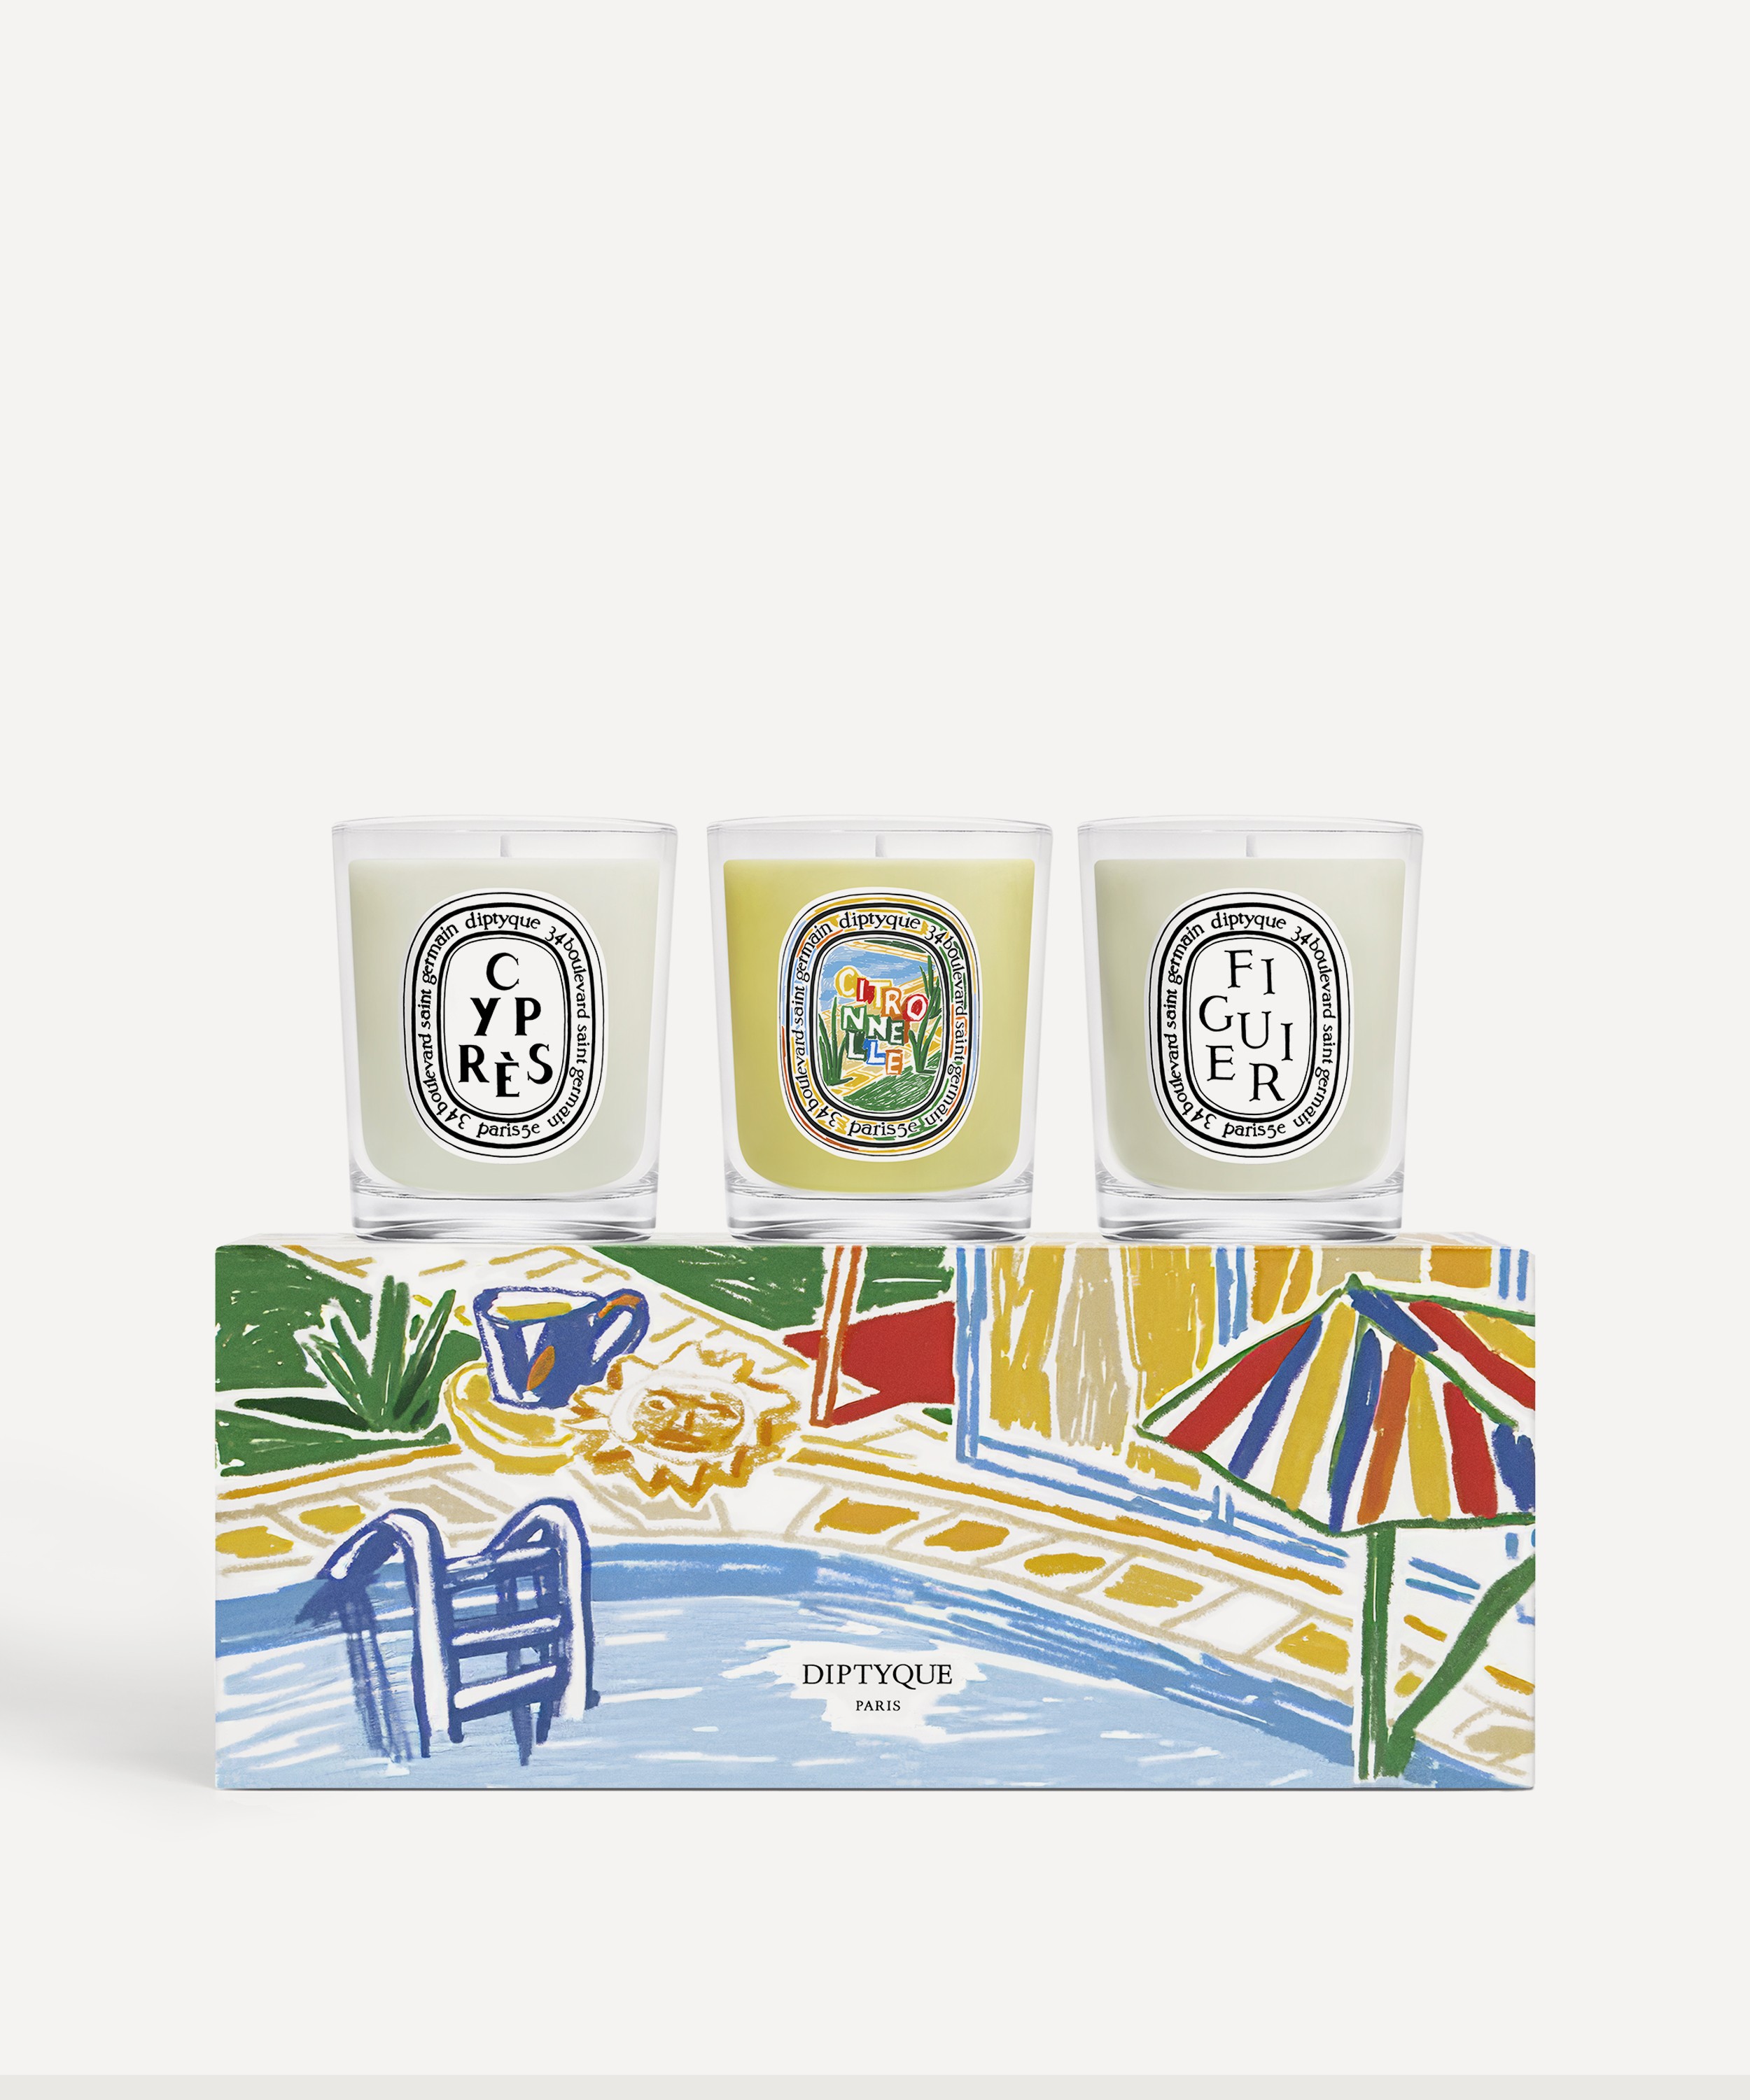 Diptyque - Limited Edition Scented Candle Set 3 x 70g